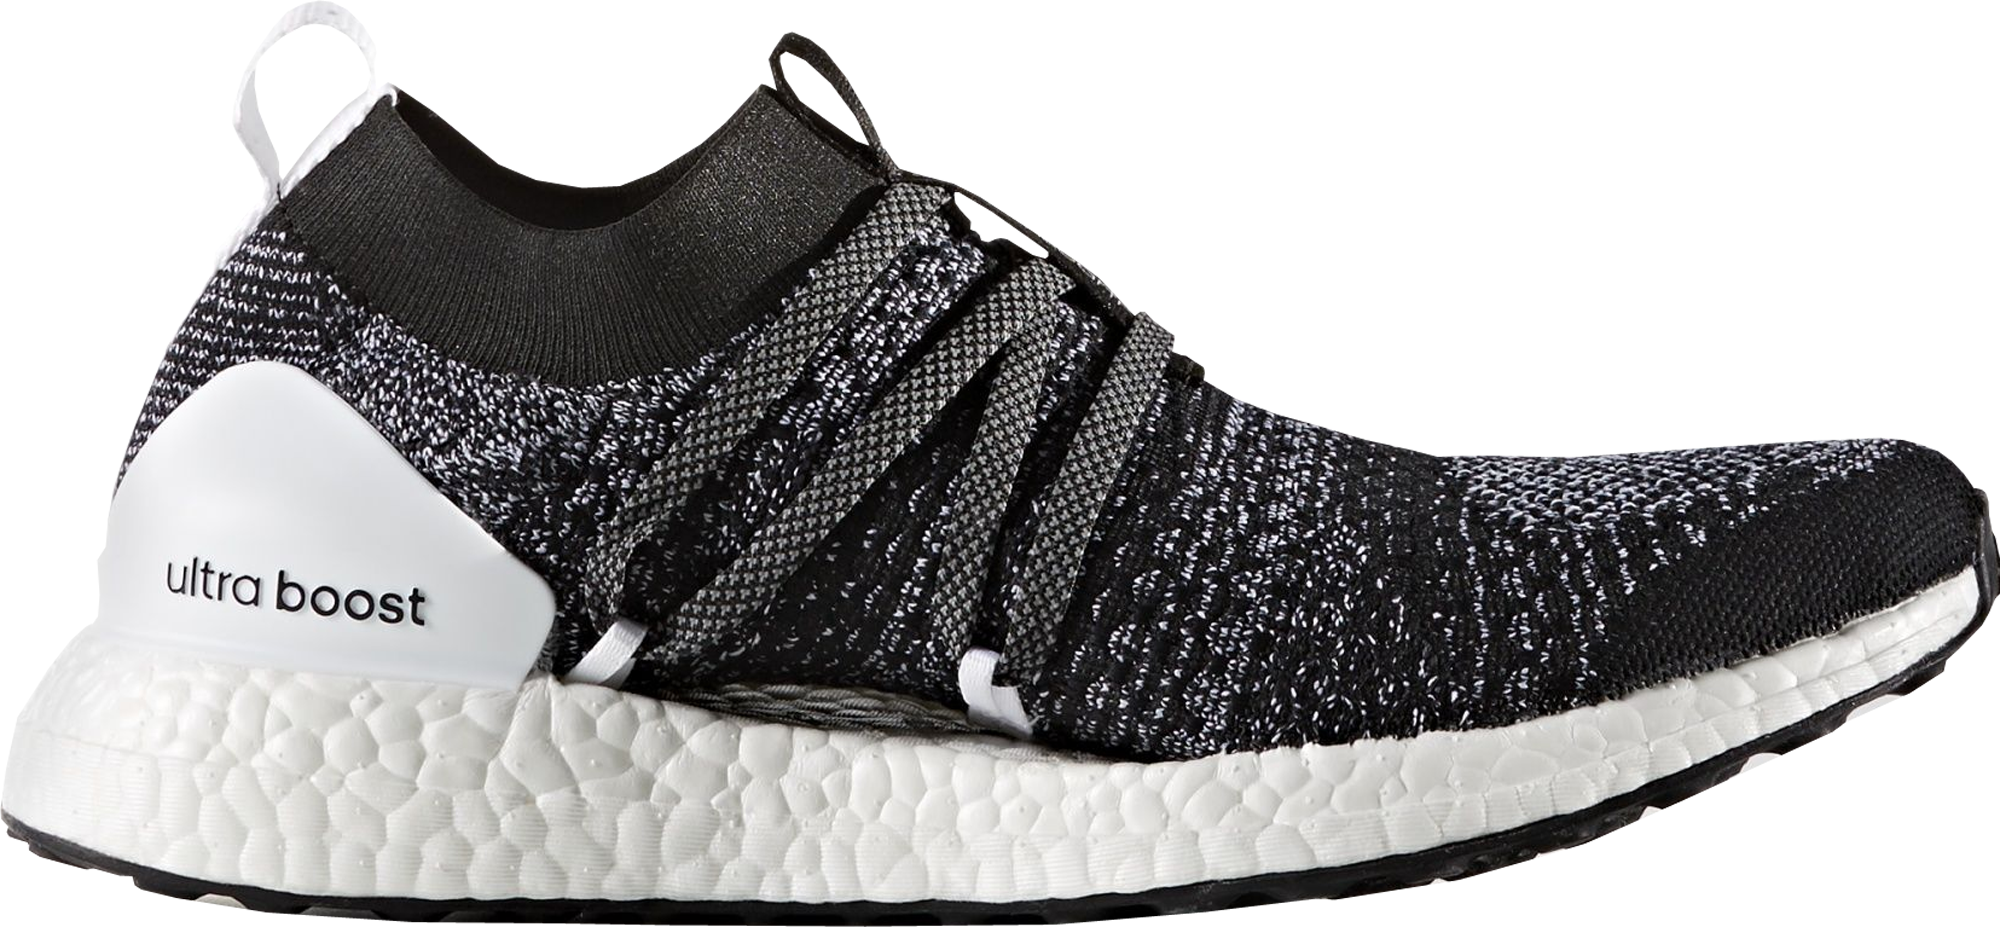 women's adidas by stella mccartney pure boost shoes